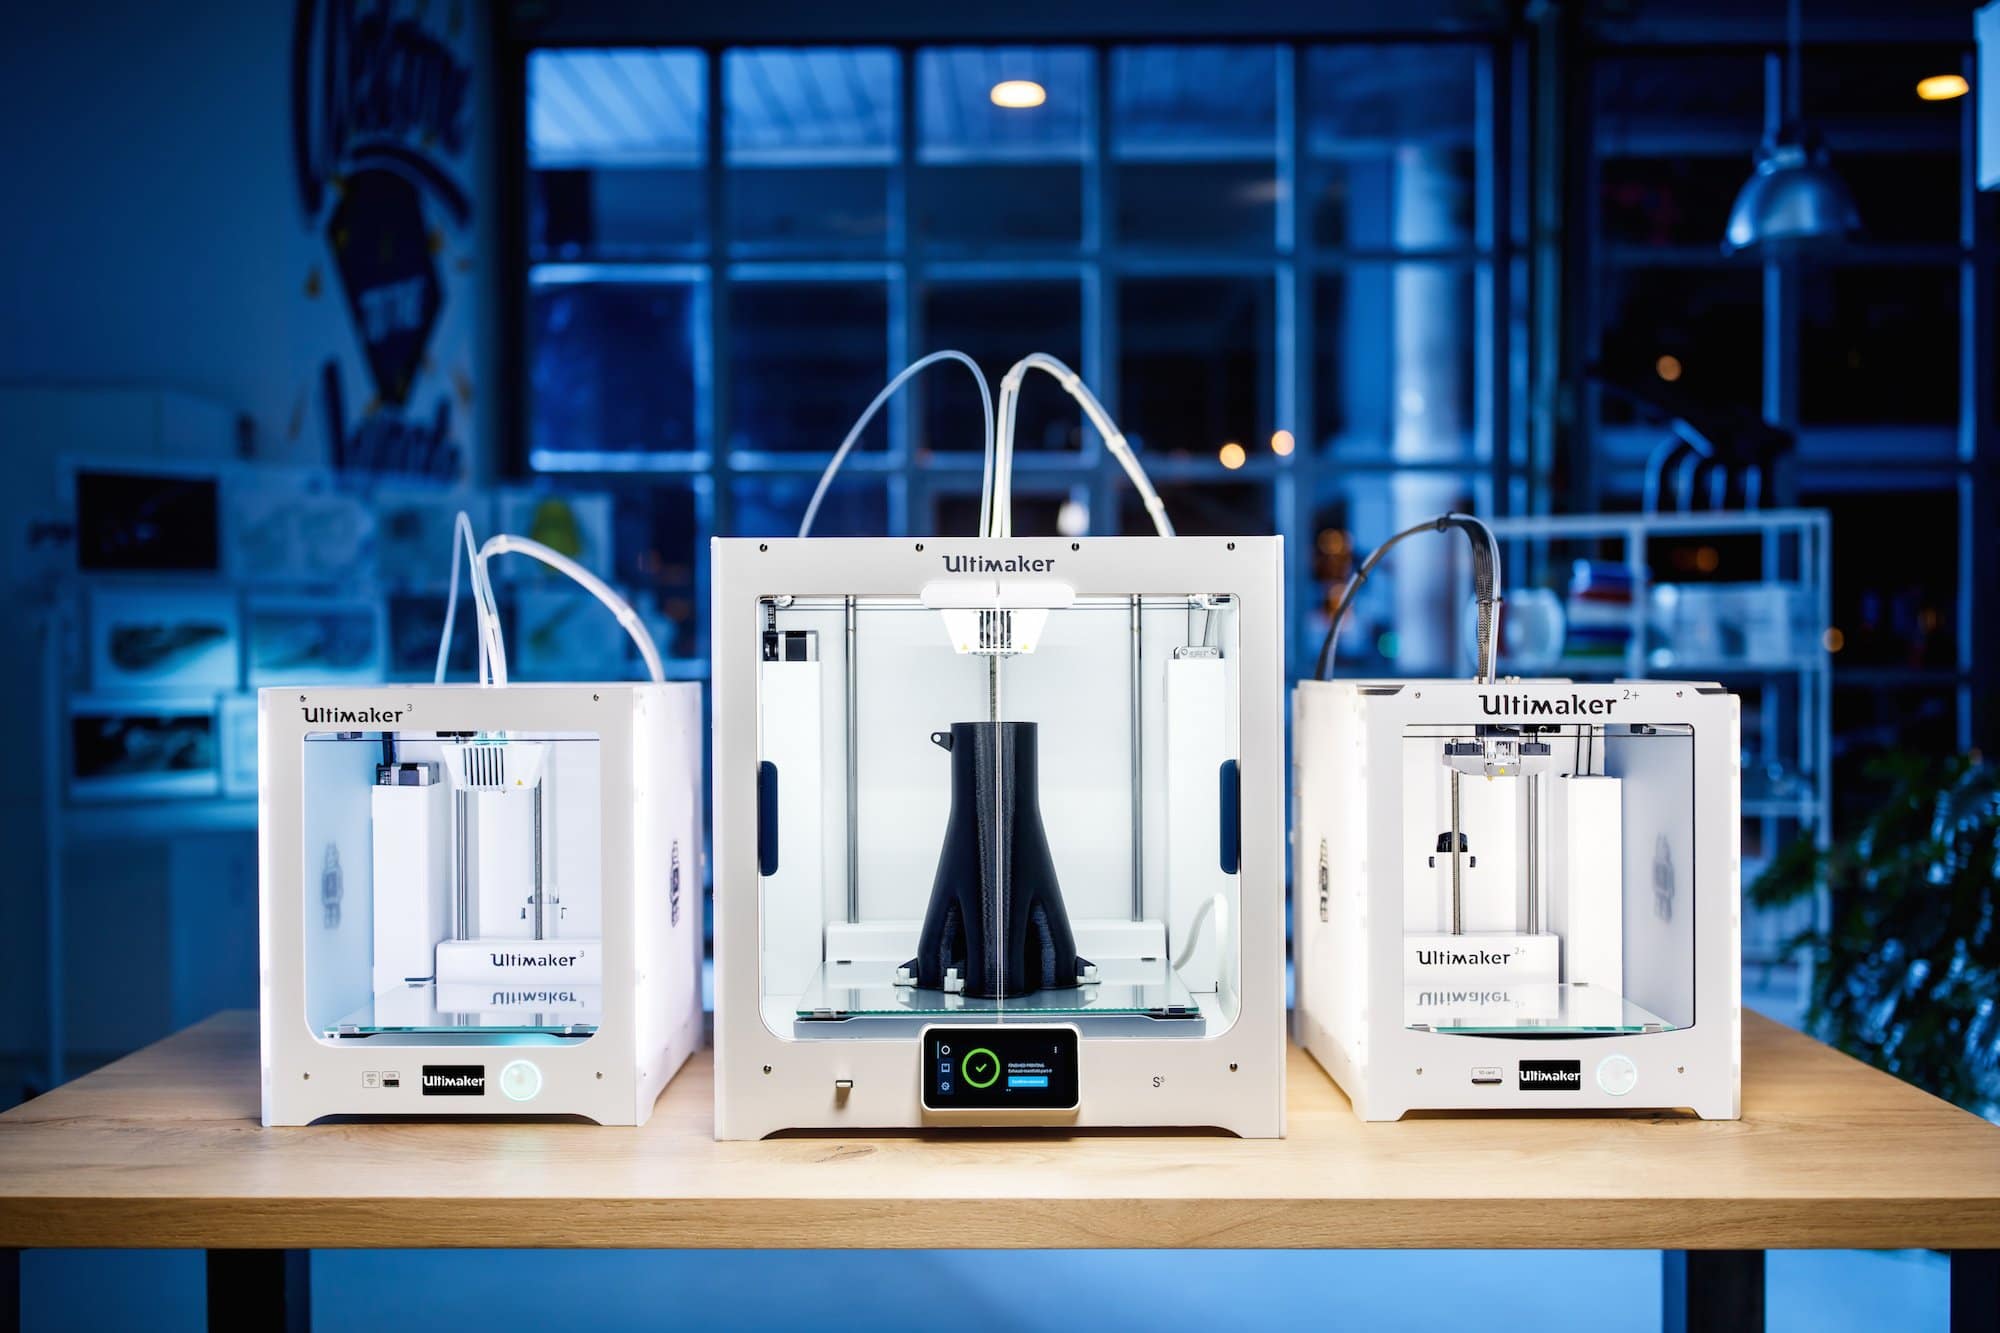 Breaking: MakerBot and Ultimaker to merge AM Industry